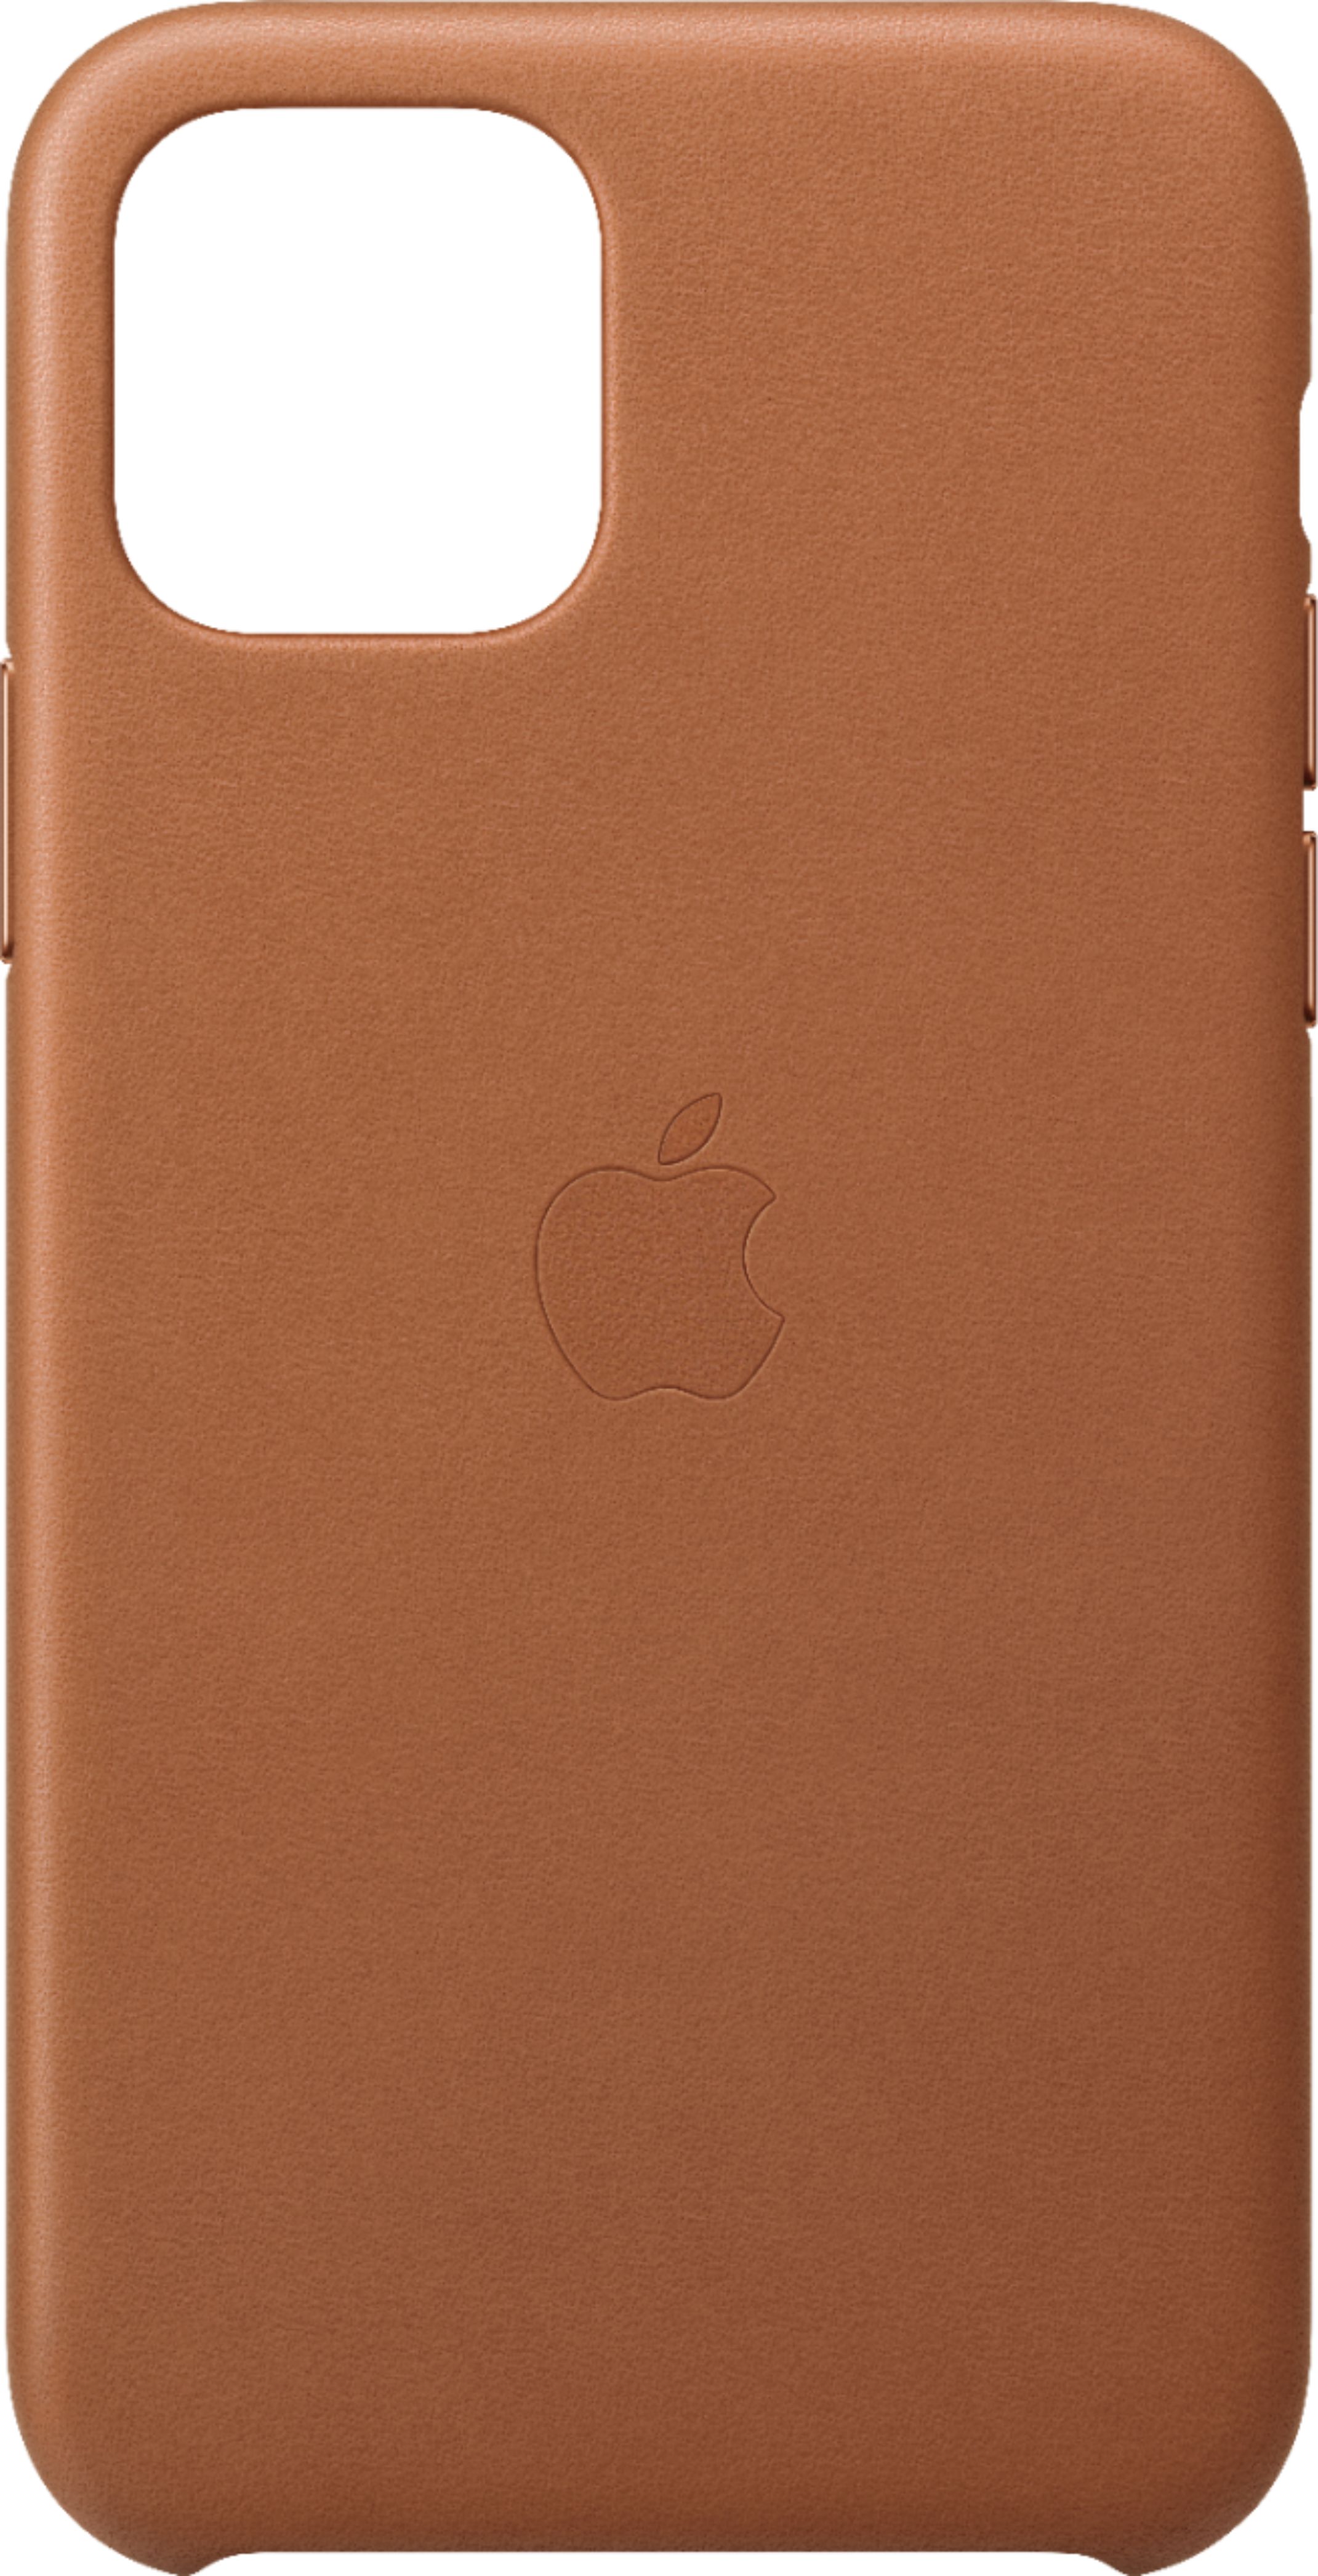 Apple iPhone 11 Pro Leather Case Saddle Brown  - Best Buy